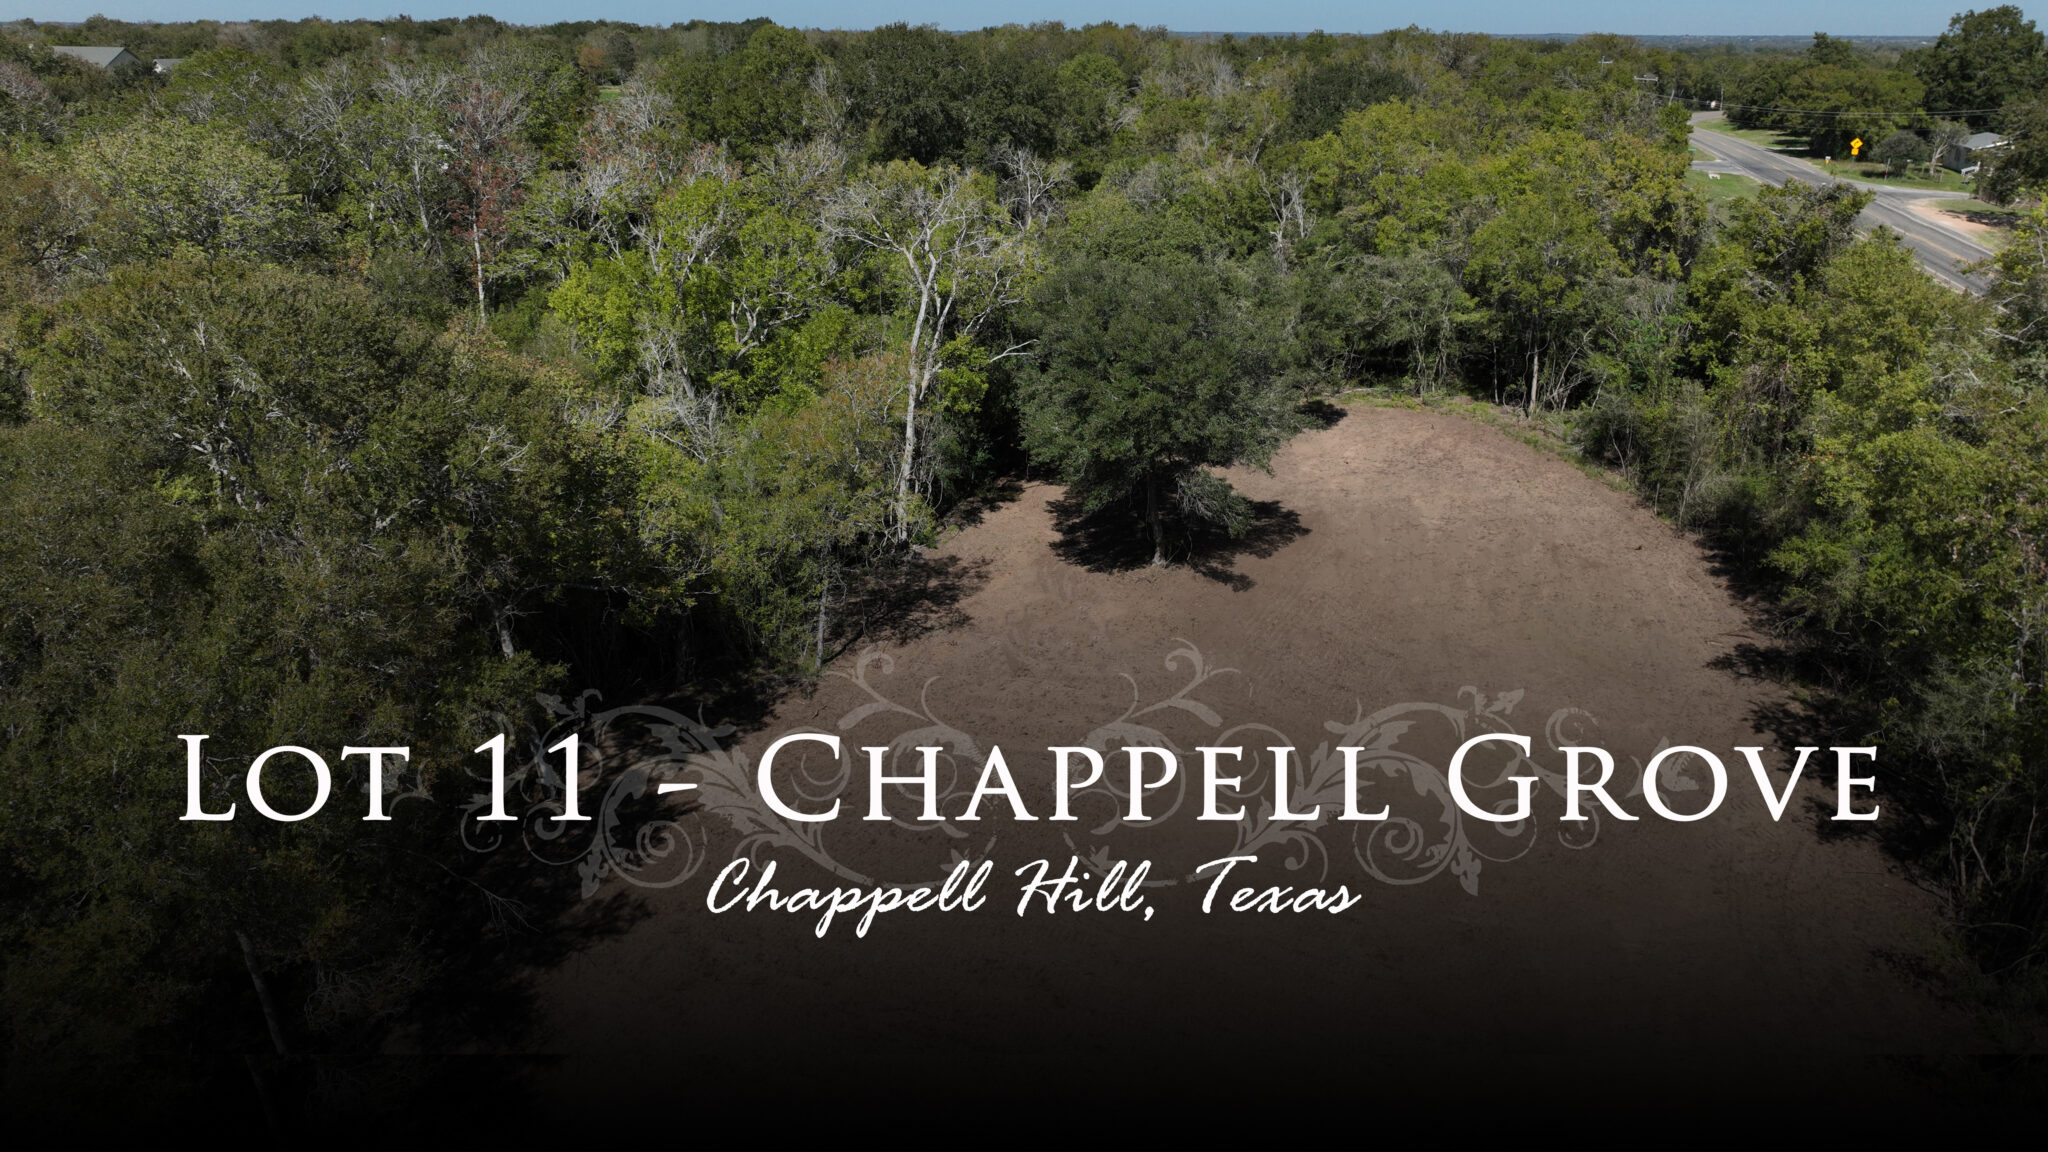 Woodland Farms- Chappell Grove